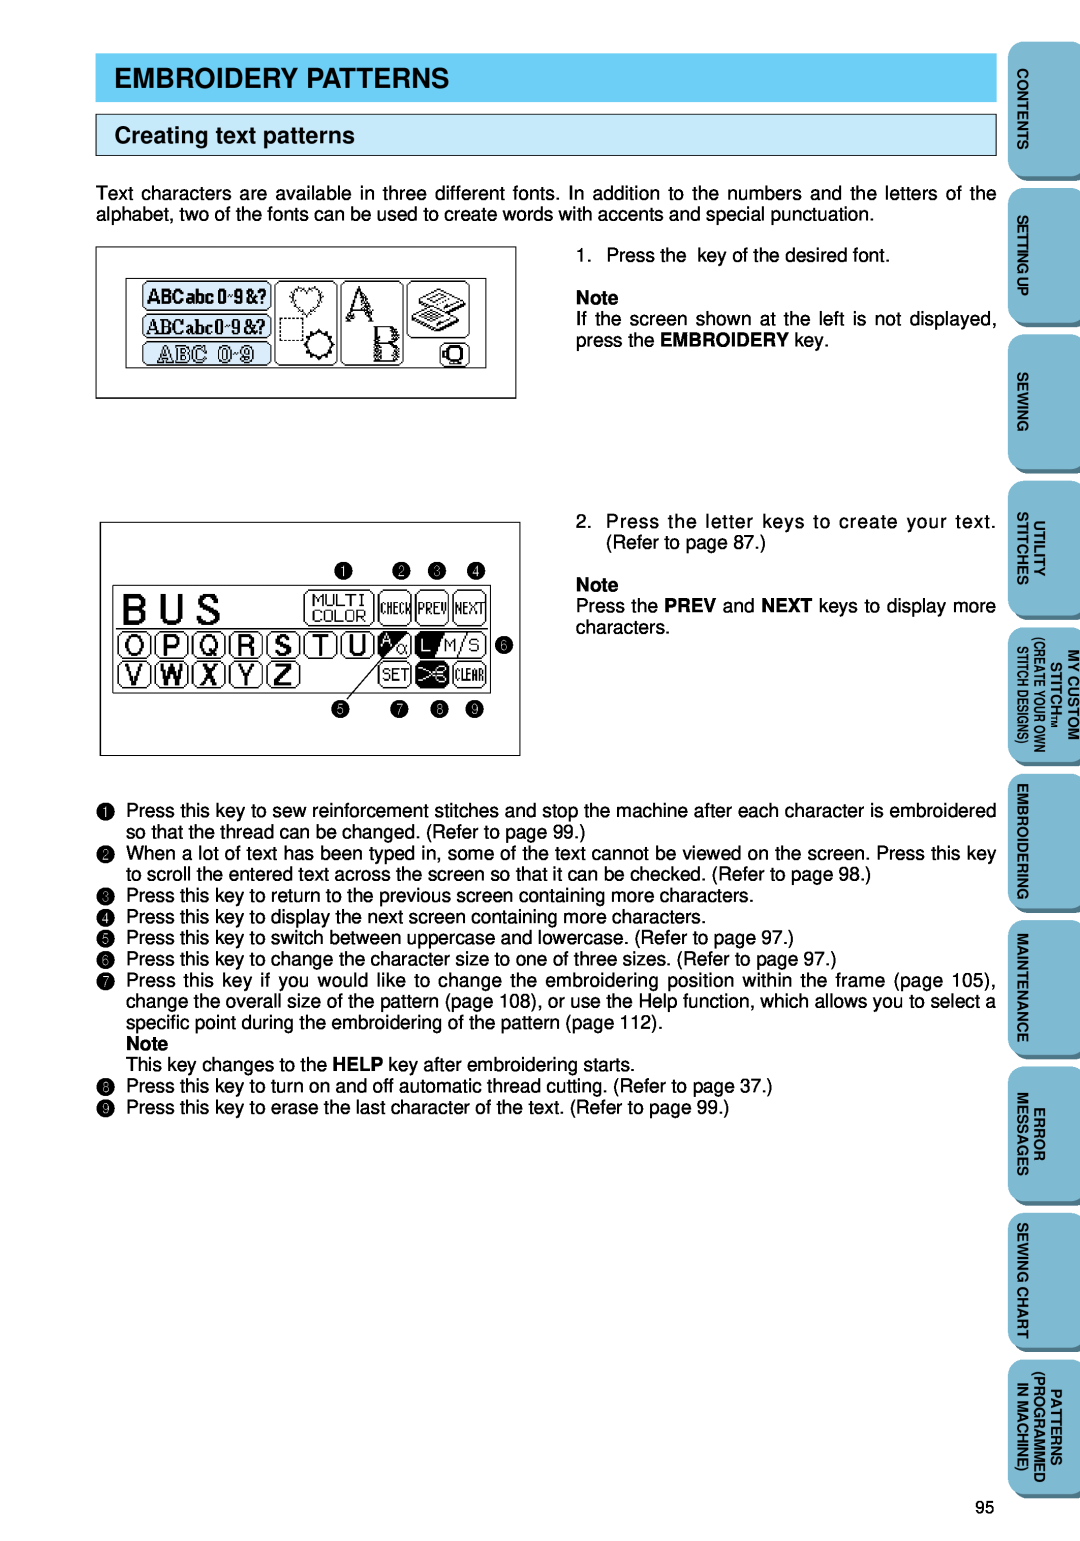 Brother PC 6500 operation manual Embroidery Patterns, Creating text patterns 